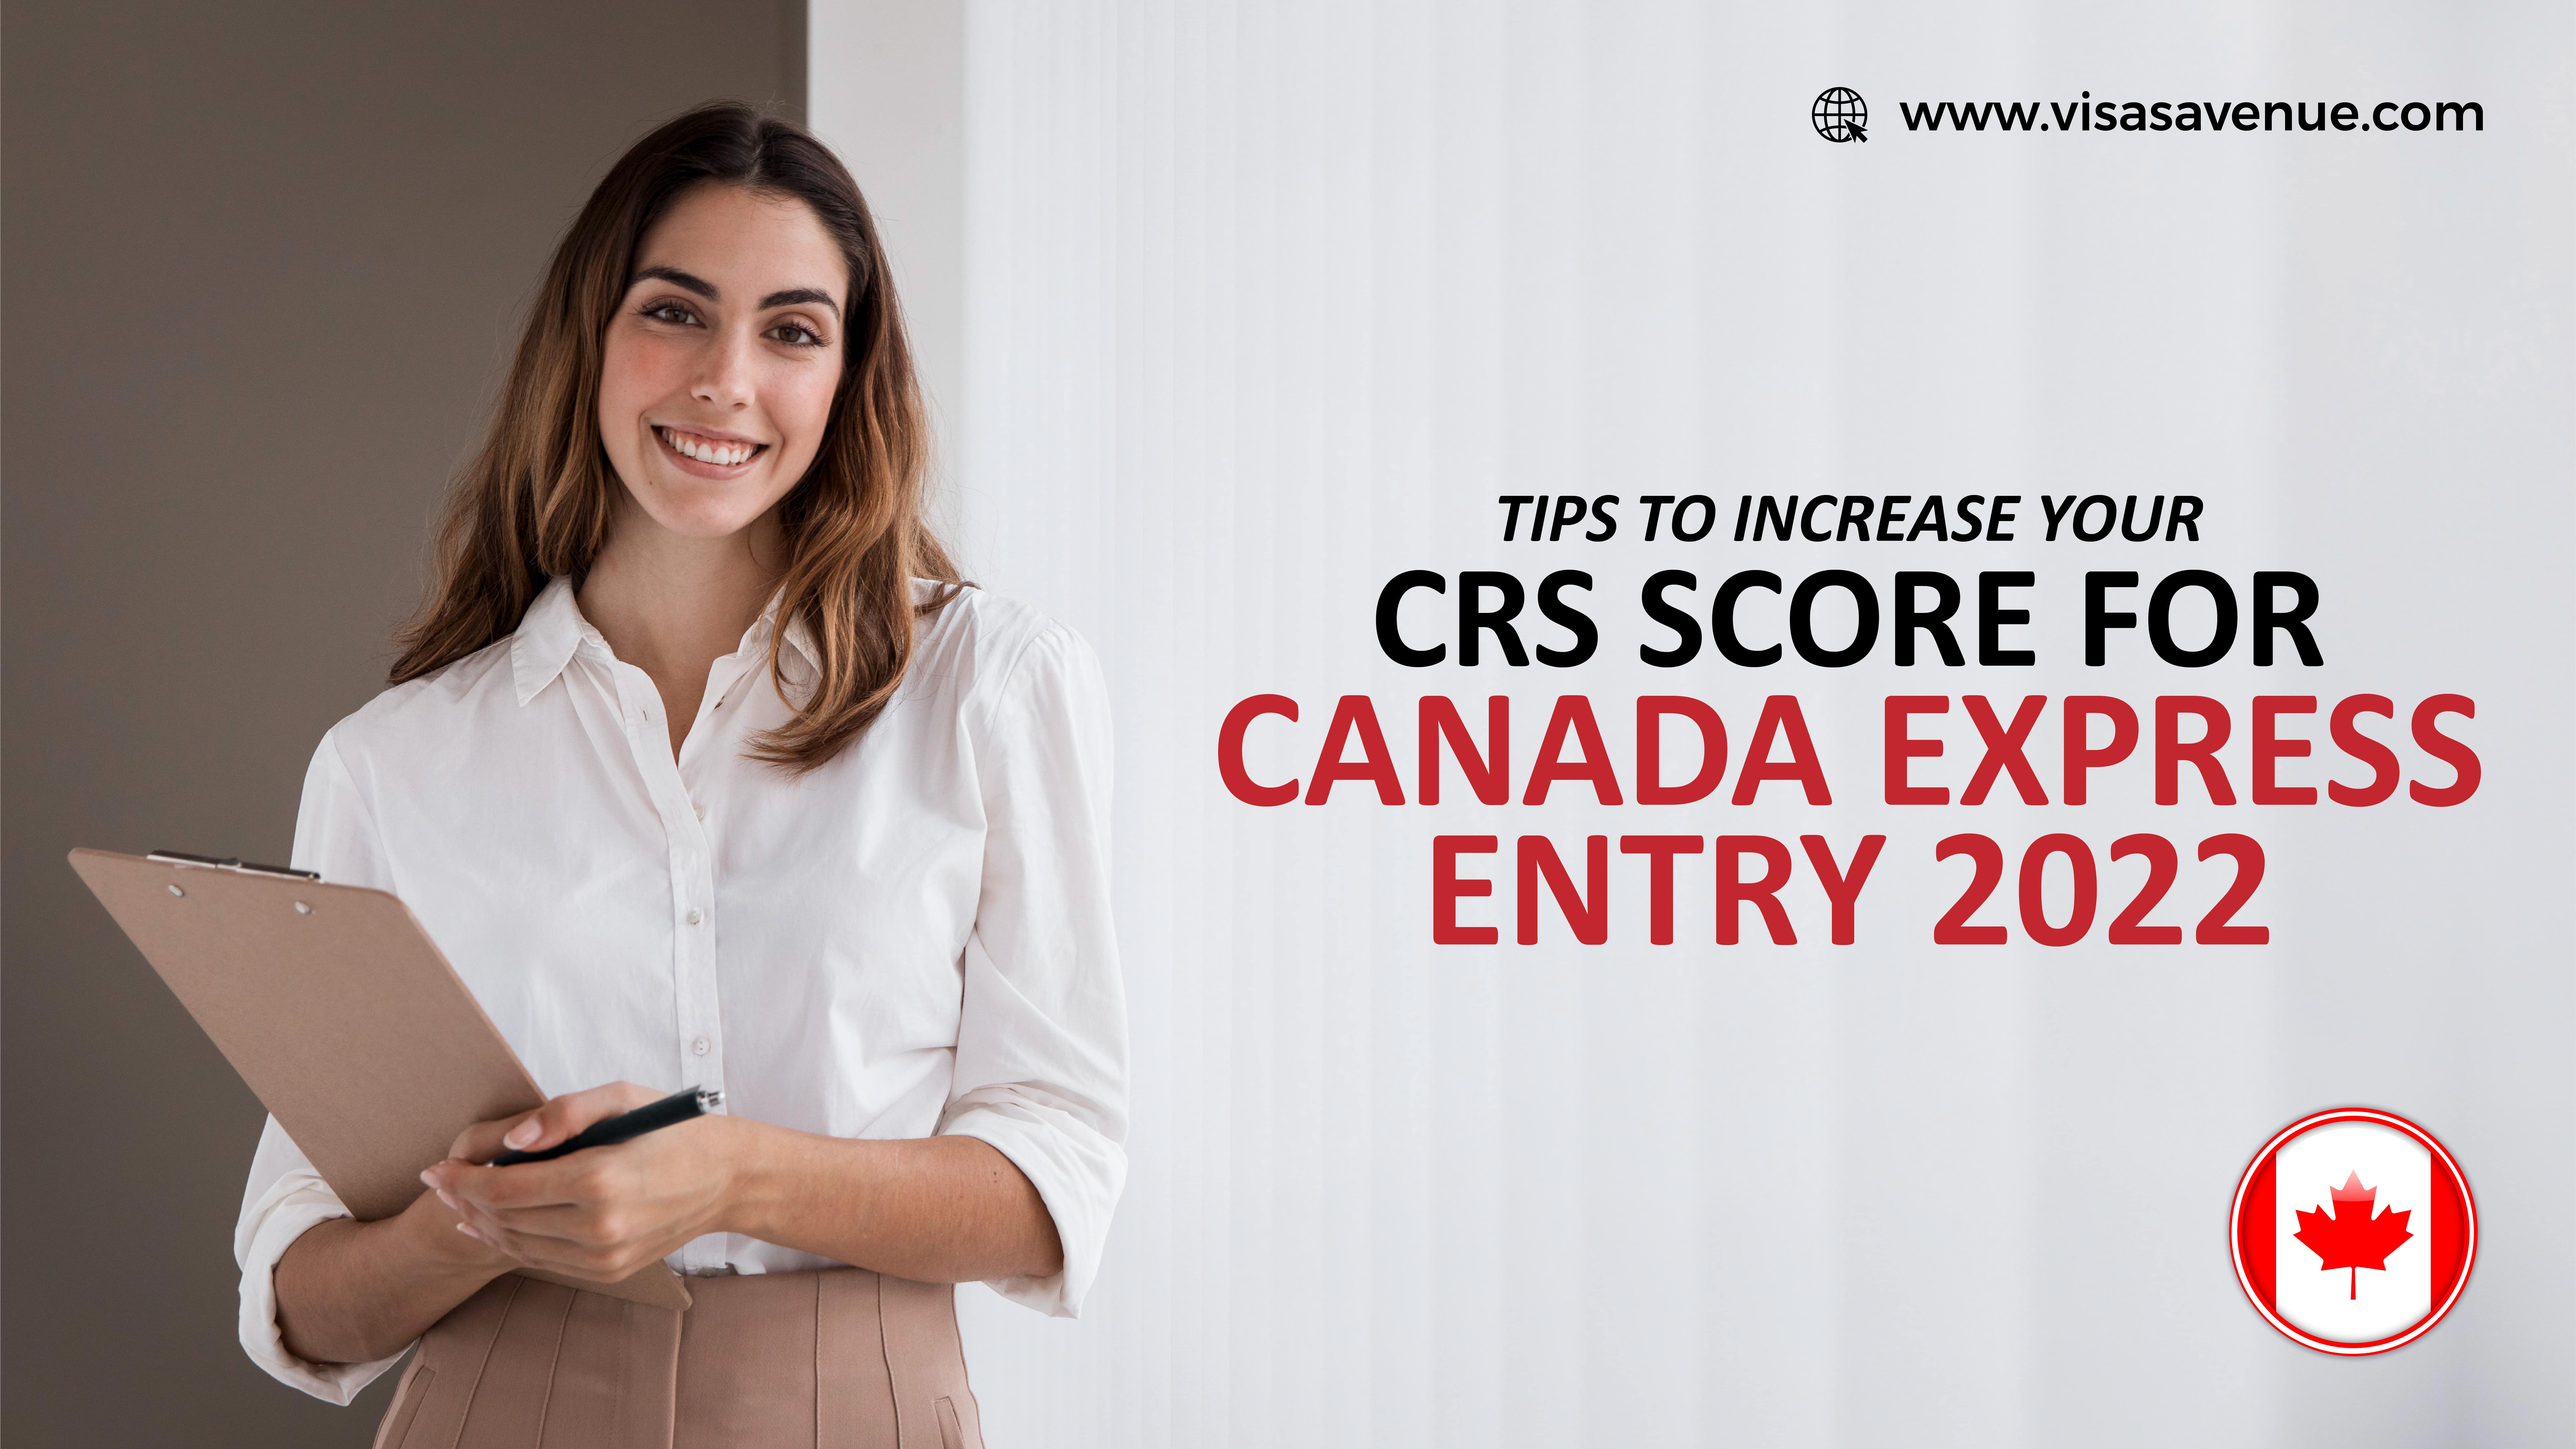 Tips to increase your CRS score for Canada Express Entry 2022